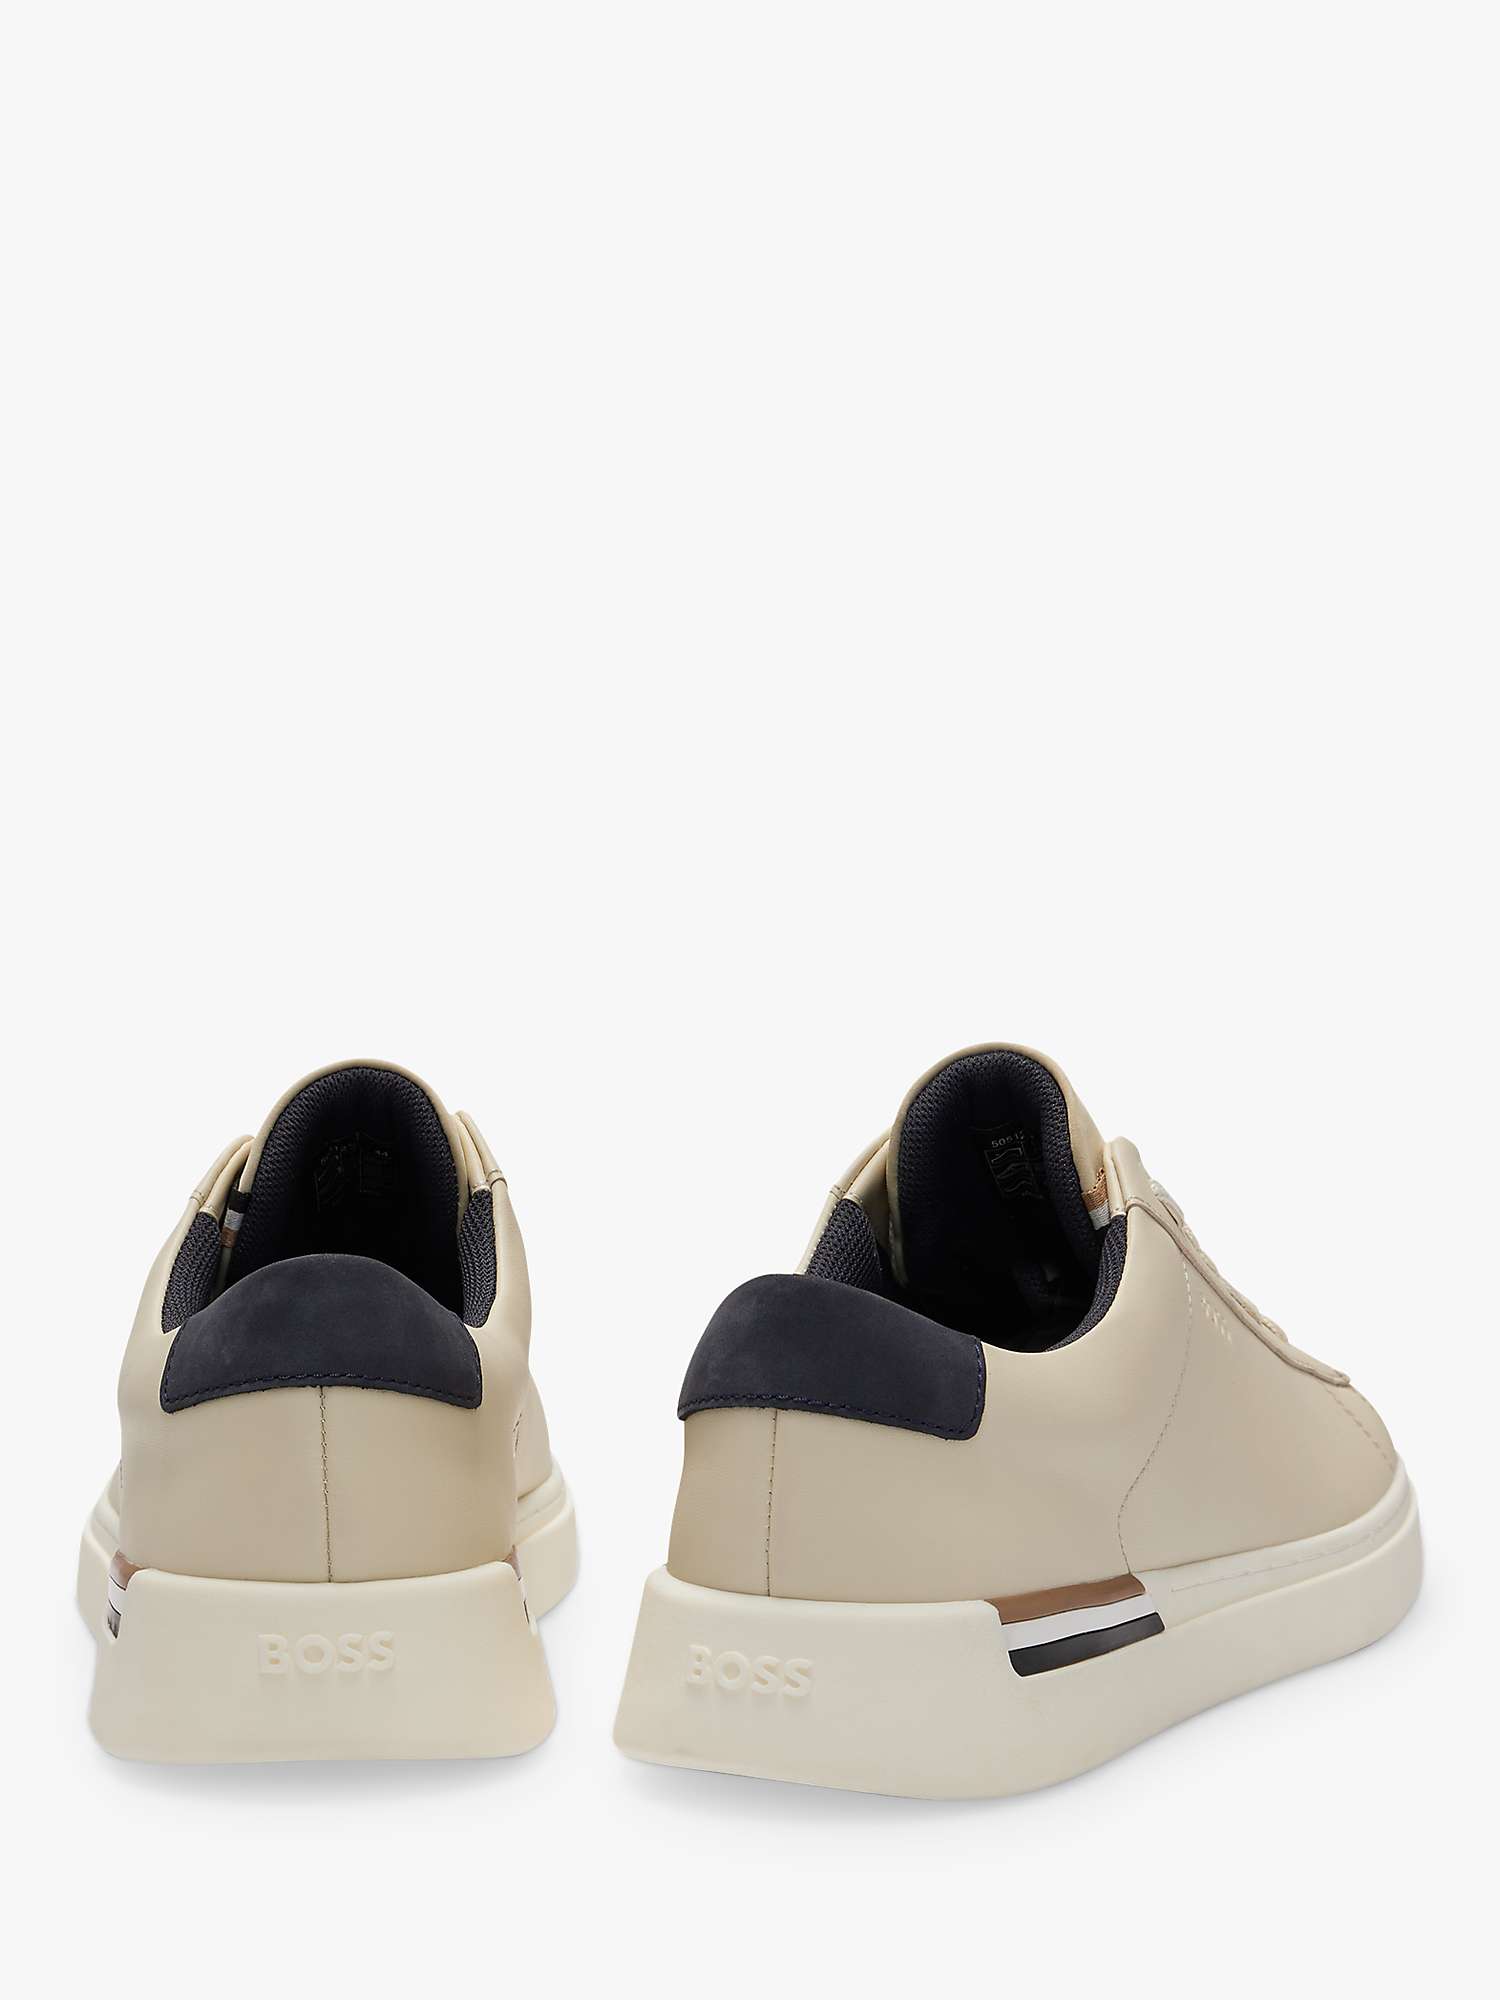 Buy BOSS Clint Basic Trainers Online at johnlewis.com